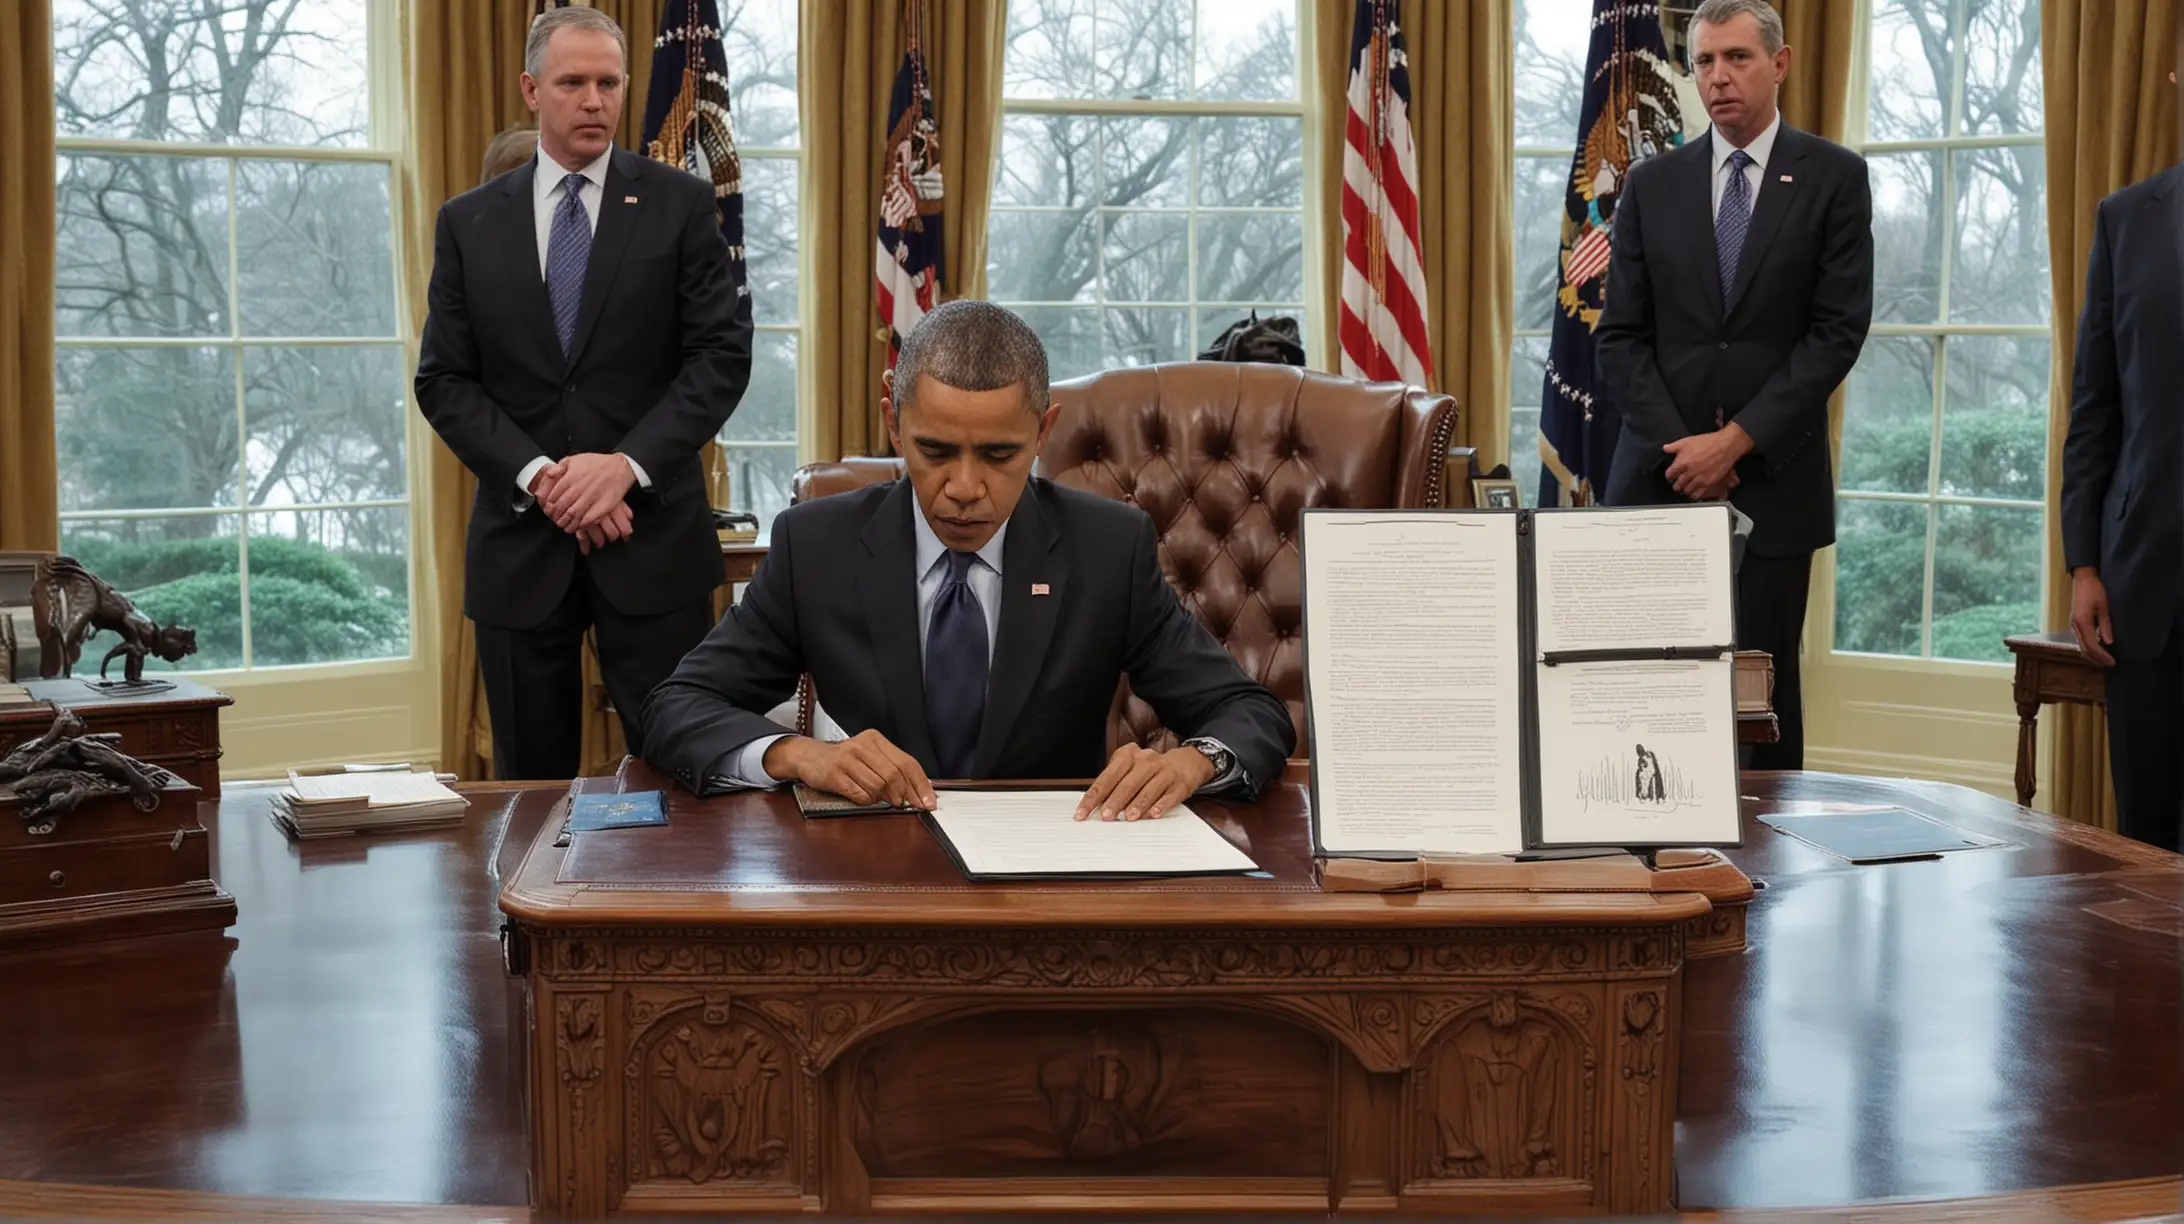 An image of Barack Obama signing executive orders at his desk in the Oval Office, with visuals of protesters and lawmakers debating in Congress, symbolizing his use of executive actions to address immigration, environmental policy, and other contentious issues amid opposition from the Republican-controlled Congress.